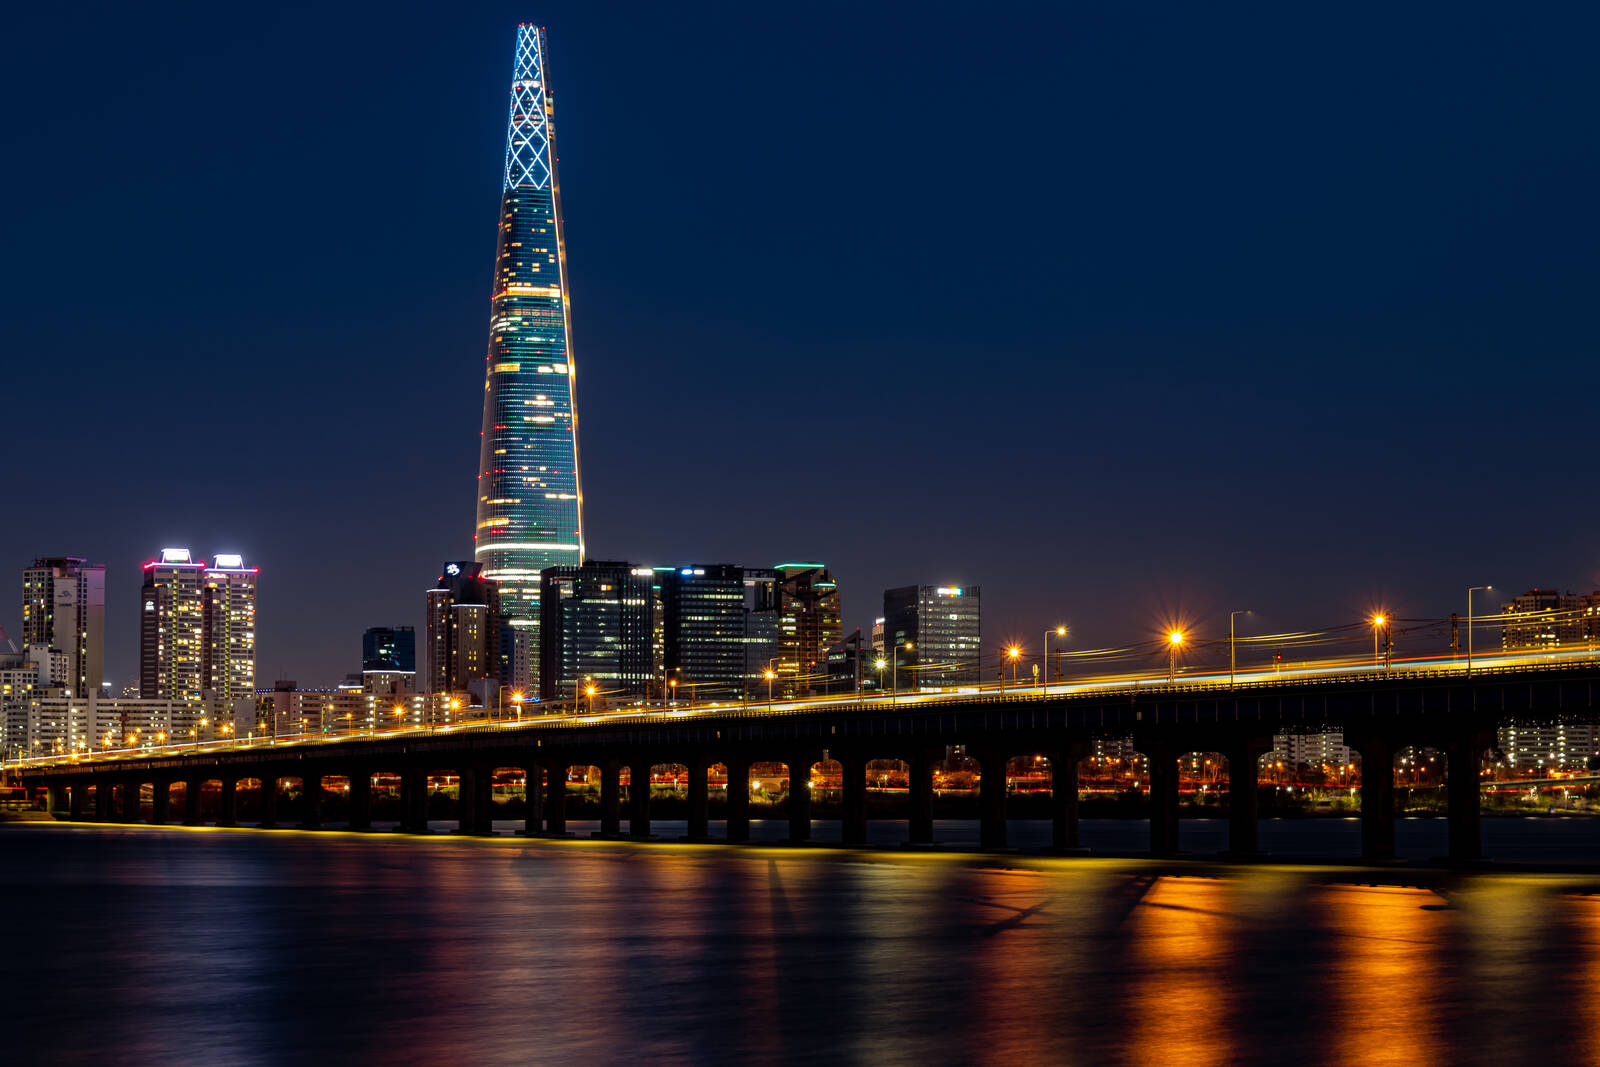 Image of View of the Lotte World Tower across the Hangang River by AS 303